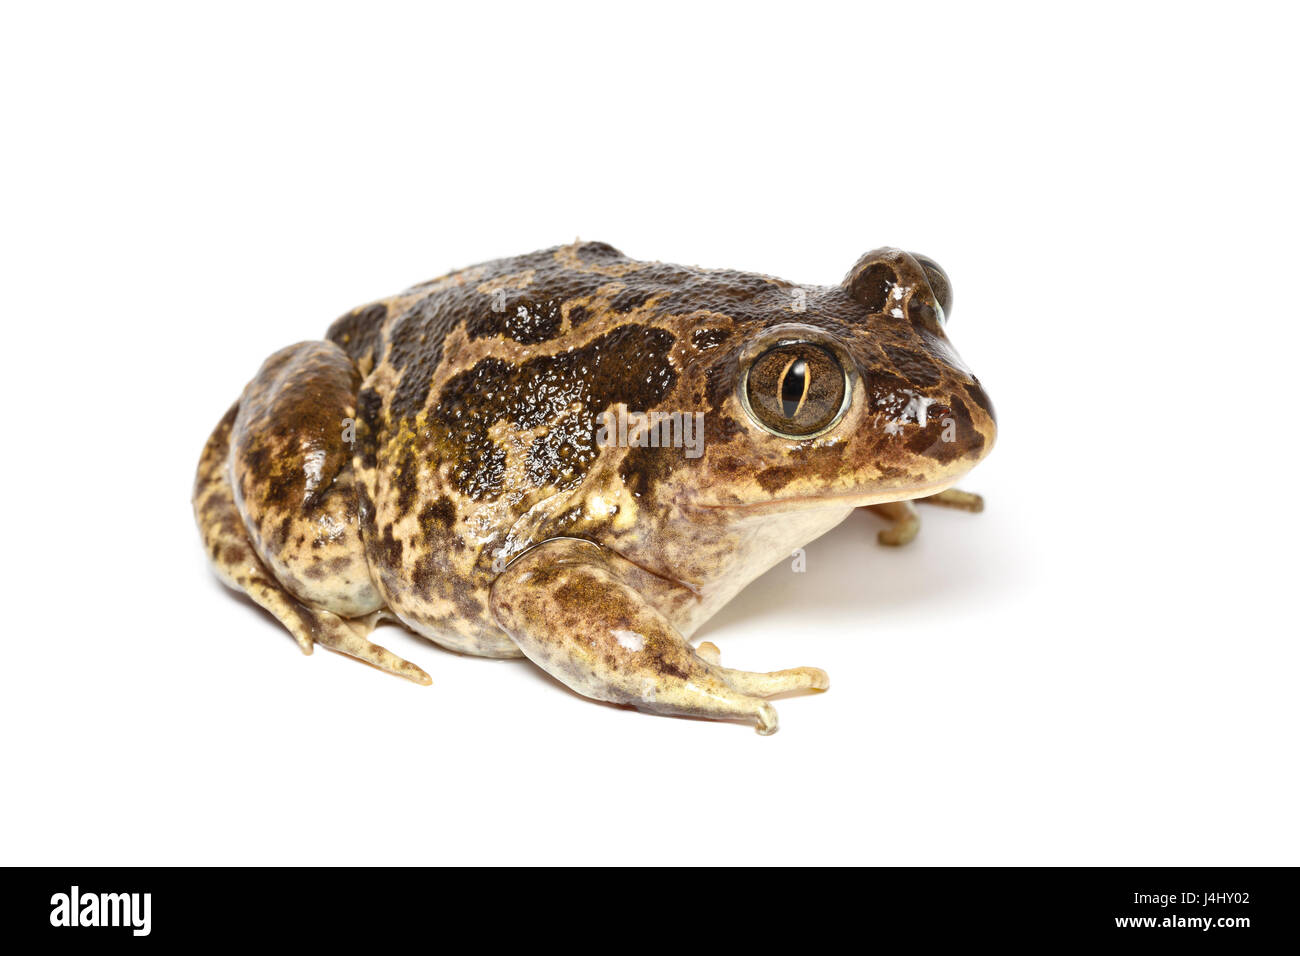 Western Spadefoot Toad, Pelobates cultripes, Costa Vicentina National Park, Algarve, Portugal Stock Photo